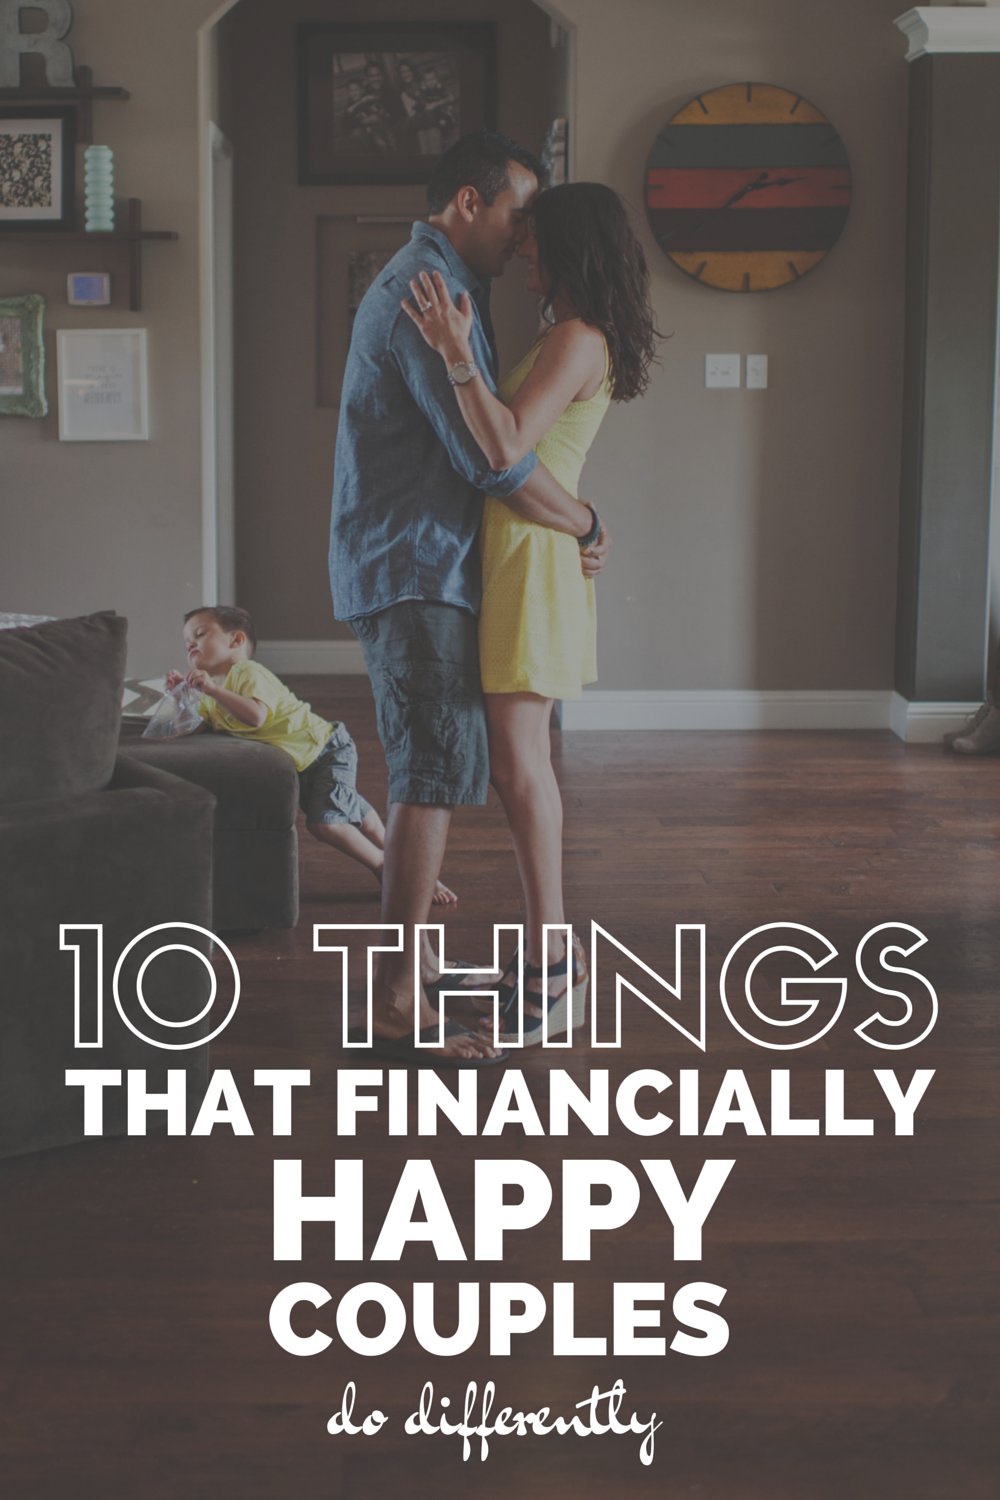 10 THINGS THAT FINANCIALLY HAPPY COUPLES DO DIFFERENTLY